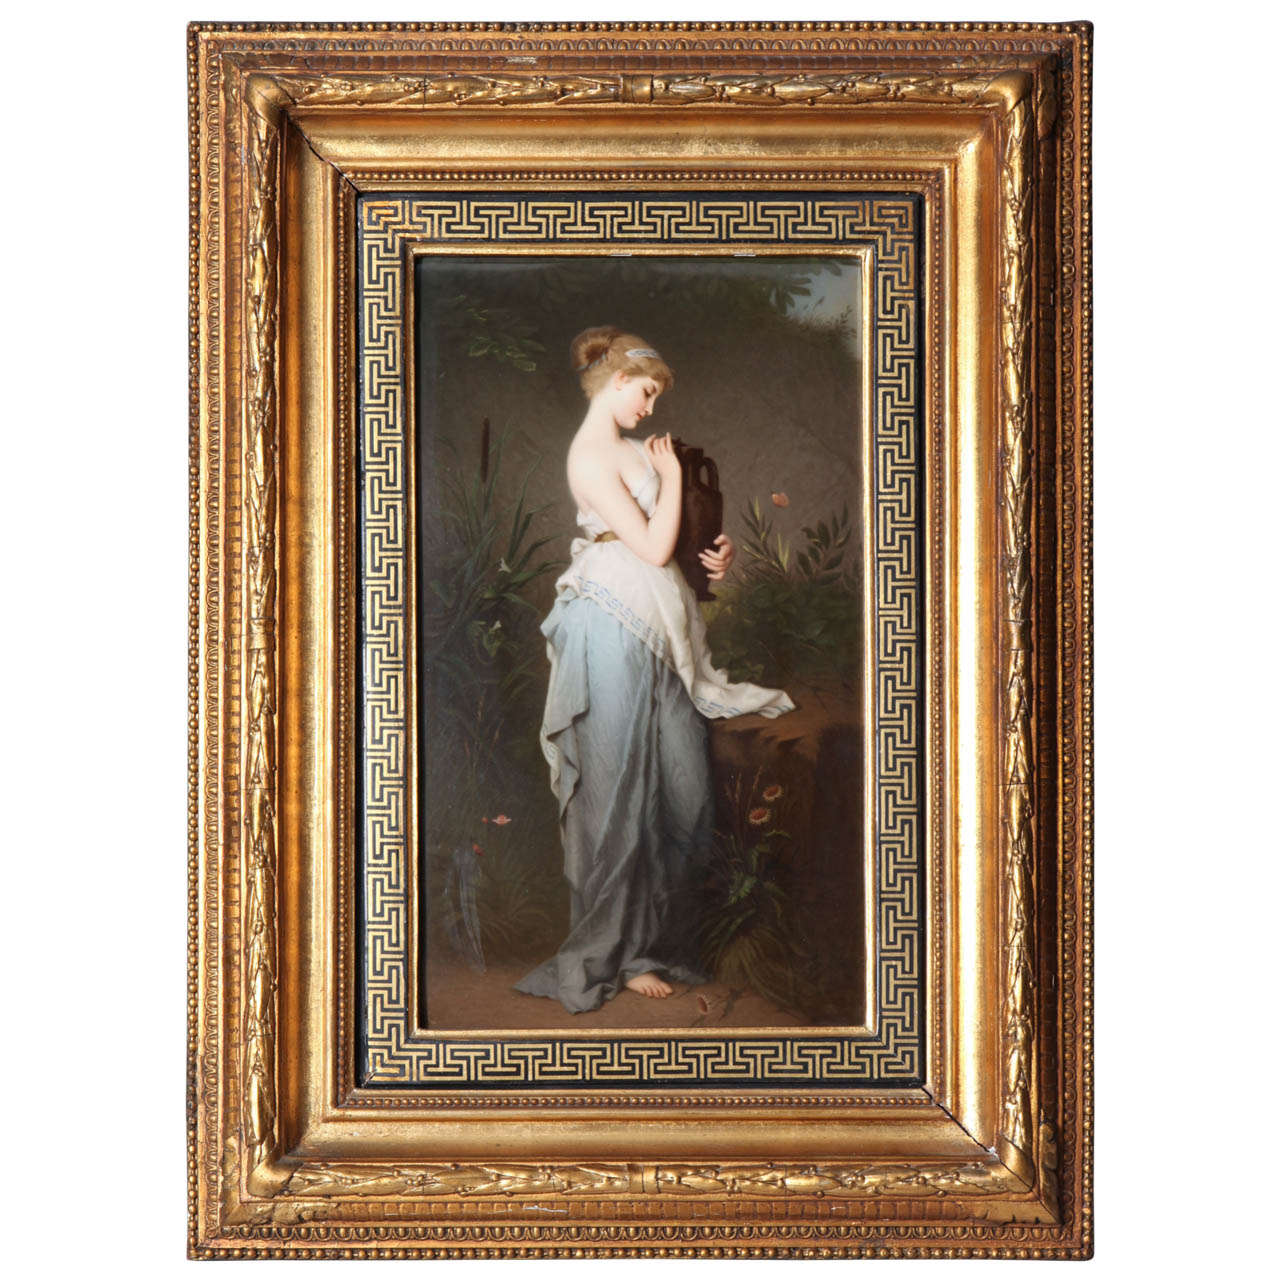 A Very Fine and Large Antique KPM Porcelain Plaque of a Beauty in Neoclassical Attire